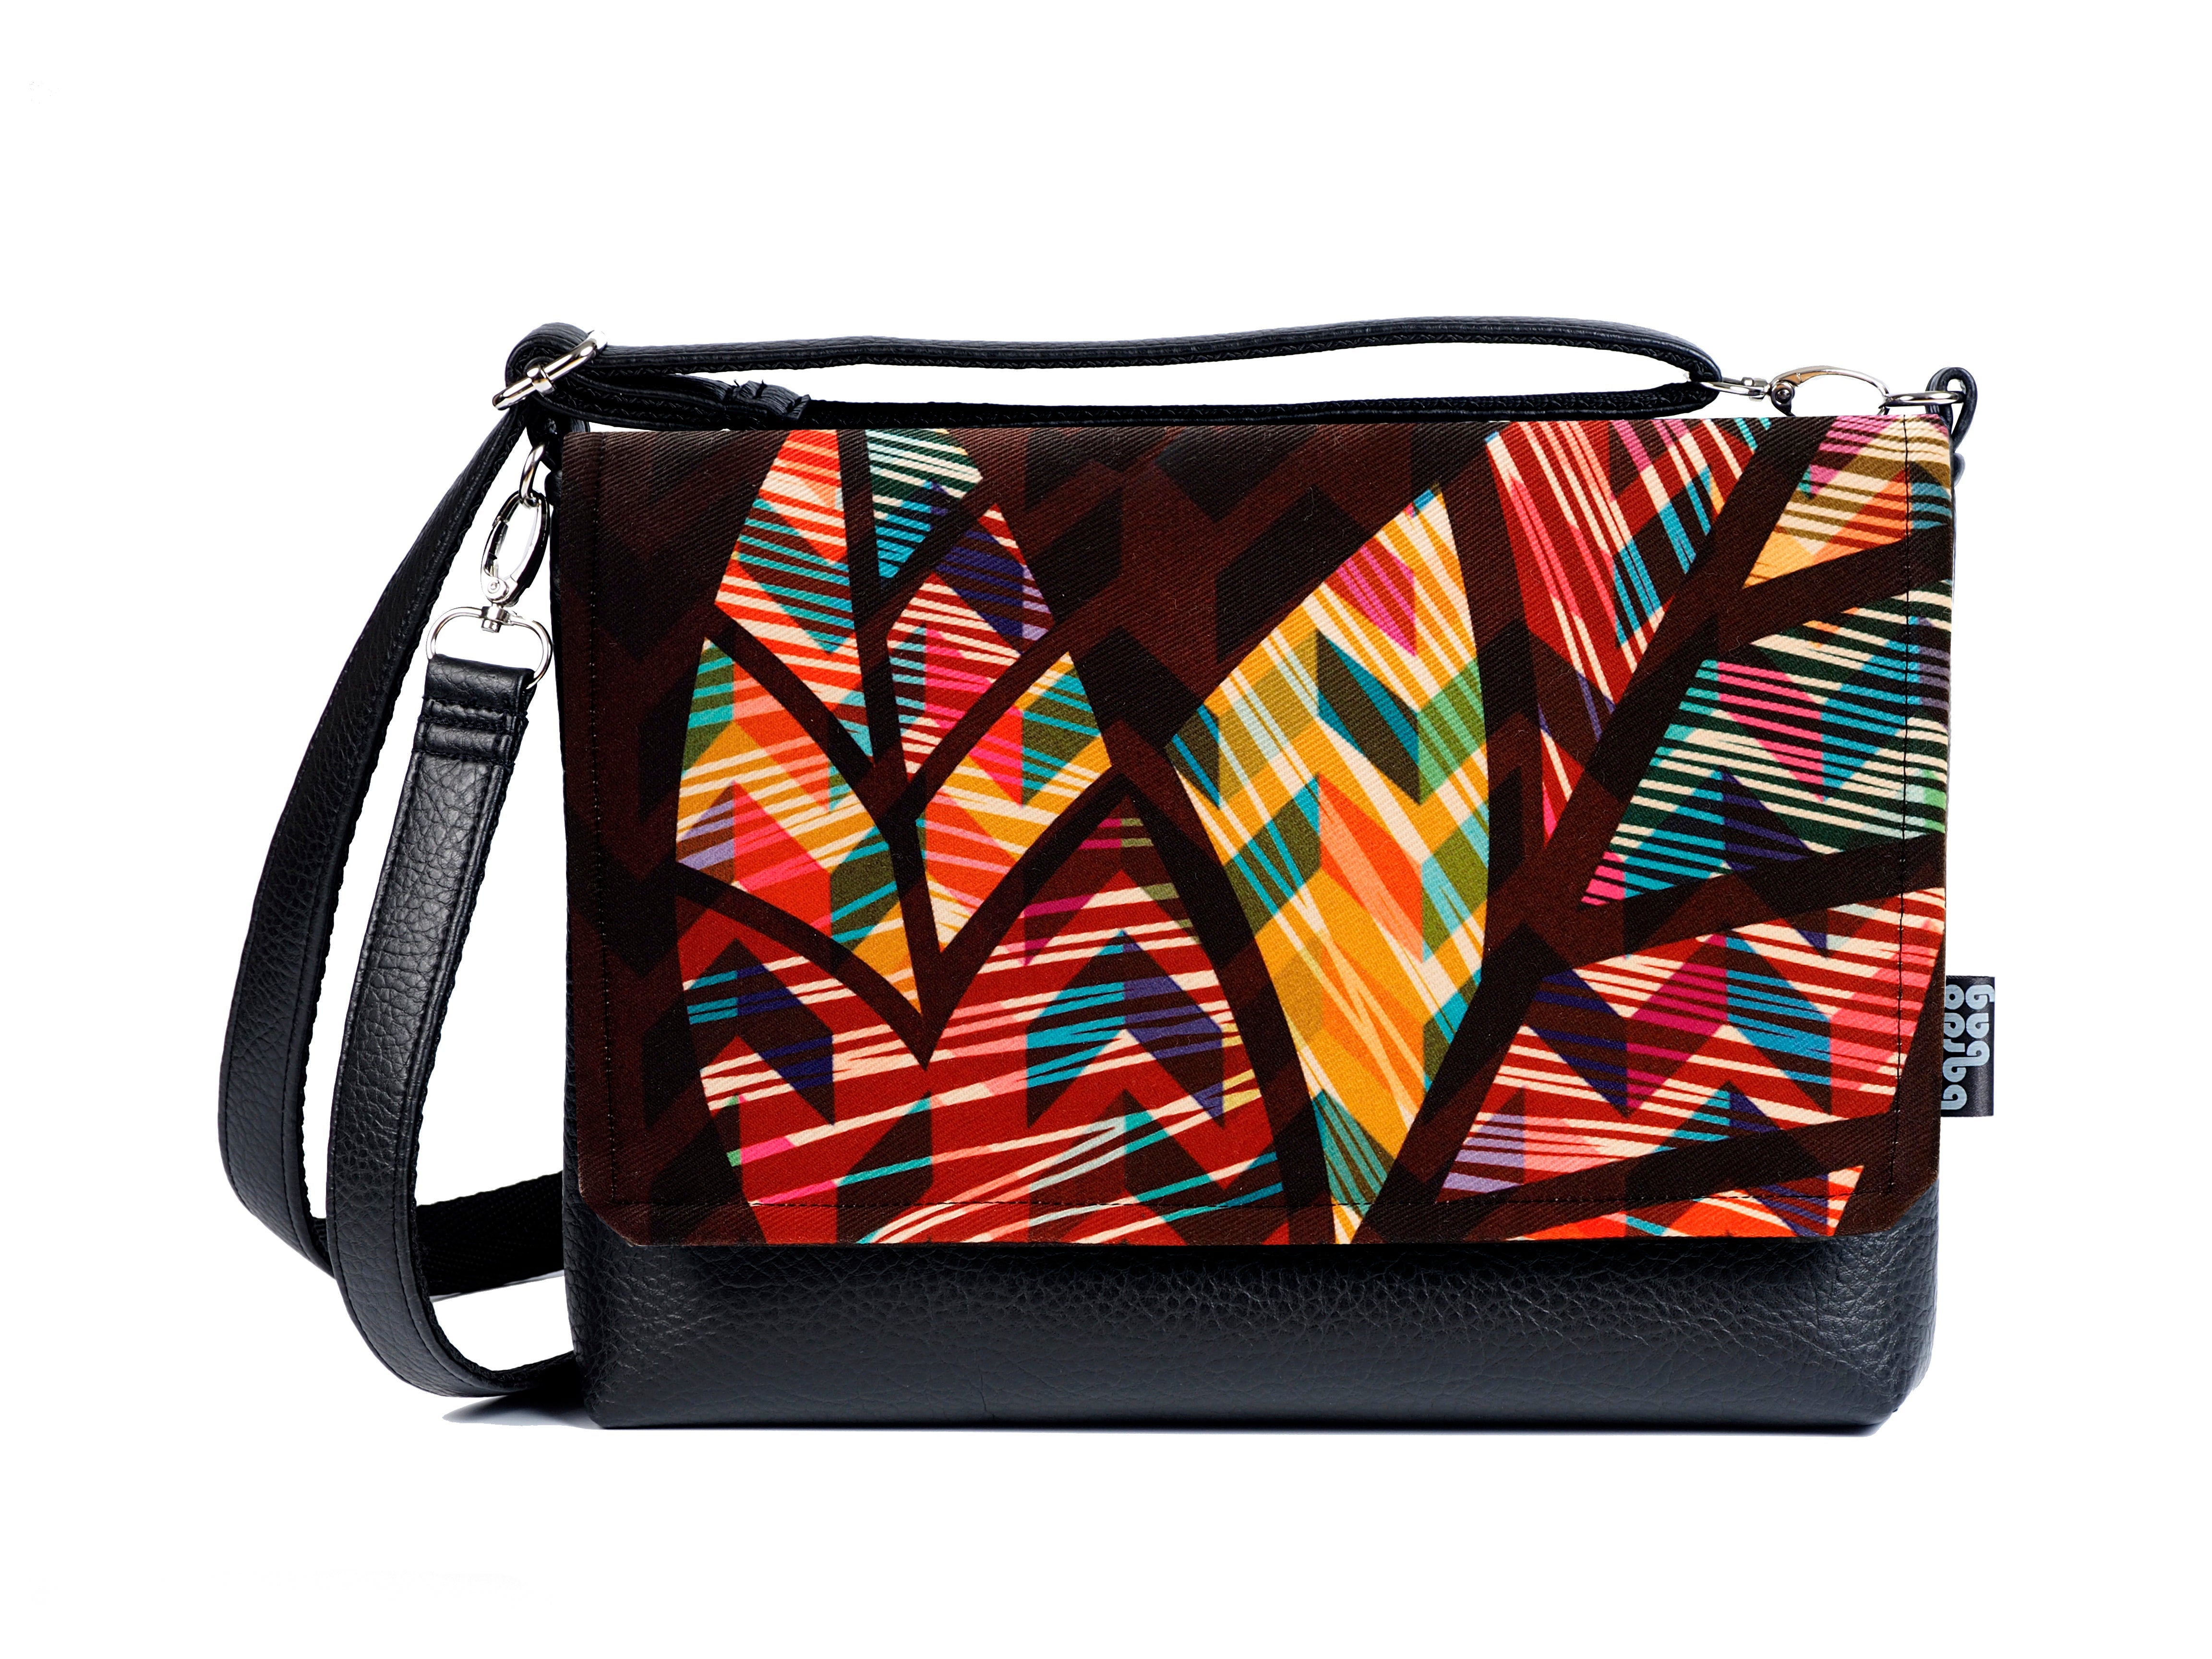 Bardo small bag - One whole - Premium Bardo small bag from BARDO ART WORKS - Just lvabstract, Art Print, black, blue, floral, gift, handemade, leaves, nature, orange, painted patterns, purple, red, urban style, vegan leather, woman, yellow55.00! Shop now at BARDO ART WORKS